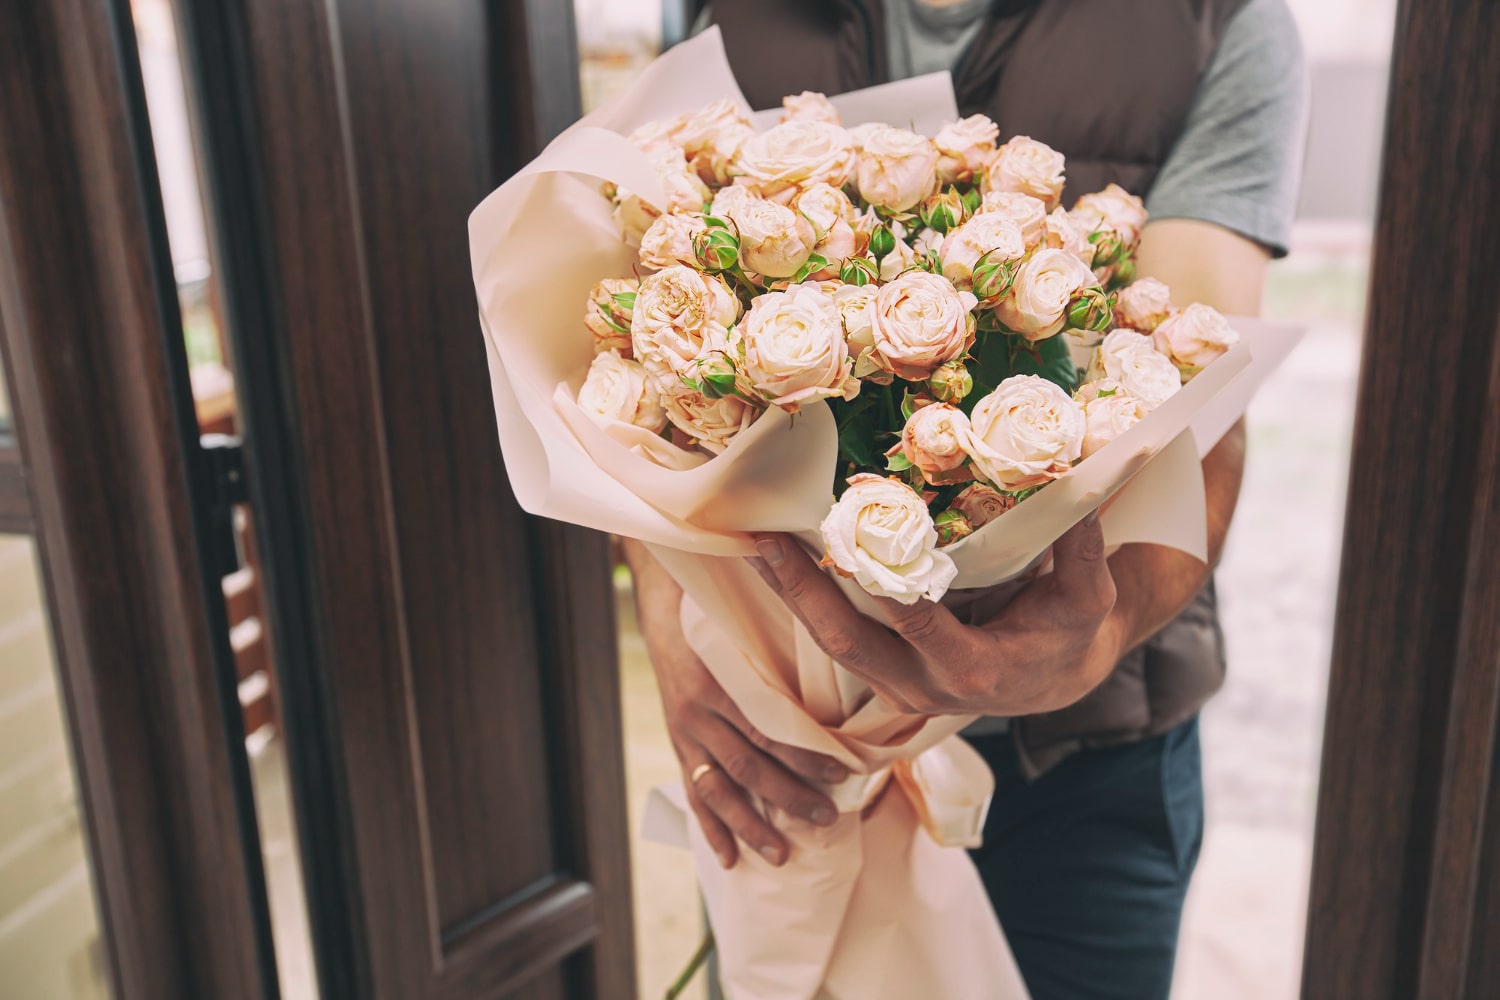 delivery-man-delivers-bouquet-beautiful-flowers-home